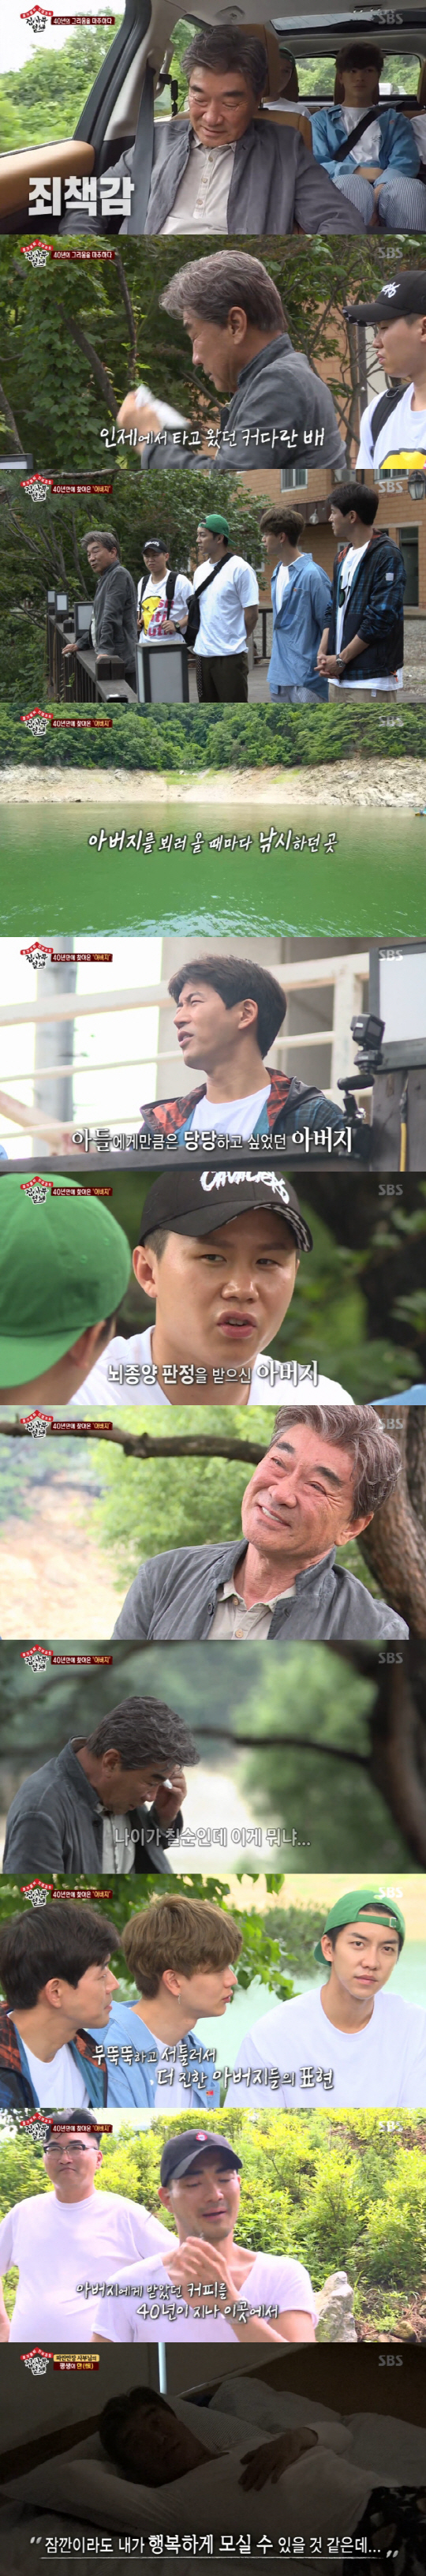 Lee Deok-hwa wept with guilt towards her fatherLee Deok-hwas heartbreaking story was revealed on SBS All The Butlers broadcast on the 29th.Lee Deok-hwa revealed an anecdote about his father, actor Lee Ye-chun: My father took care of himself in Faro.To make matters worse, I started a three-year penance in one room with an autobi accident. My father, who was in medical care, suffered a great shock as he deteriorated sharply after my car accident.I was admitted to the hospital alongside my father with a wall. He died in the next room. Lee Deok-hwa has confessed to the sorry heart he has been carrying for life since his father died.I was very good at taking a lot of vacations and getting better during the medical treatment period, but I was always guilty because I felt like I had a lot of mistakes.Lee Deok-hwa advised Lee Seung-gi, who won the prize as a member of the cohabitation, Im sorry, you cant come back now, do well to your parents.If I had been a little more alive, I would be able to make me happy for a while, he said.Master Lee Deok-hwa and Lee Seung-gi, Lee Sang-yoon, Yuk Sung Jae, and Yang Se-hyeong headed for Faro, where Lee Deok-hwa had memories of his father, actor Lee Ye-chun.The master appeared nervous before departing, saying he wanted to go for 40 years but couldnt go, with Lee Deok-hwa saying: If its a guilt, is it a guilt?I was happy to be here when I was resting here, but I think that the person who was doing well is dead because of me. I think I will come out when I fish here at night. Faro was a fishing spot in Gangwon-do, where his father had enjoyed his life. The master, who was staring at the river for a long time, thought, There is nothing changed.The master then revealed an anecdote that came a long way to give him a cup of coffee, which his usual blunt father was fishing. Hey, I have a sip left. Drink.I just give it to him. I gave him a cup of coffee and disappeared. I was born and cried. He cried. What is this?The members who listened to the story were blinded and could not speak for a while.In particular, Yang Se-hyeong, who showed a dull appearance, also revealed an anecdote with his father who died four years ago, and finally made them cry and watch.I came to the hospital the day before I was sick, but I had a potato soup and I was tested the next day, and I was diagnosed with a brain tumor, he said.Love expression has never been spoken and just showed it as an action, said Lee Deok-hwa, manager and son of Master Lee Tae-hee.He showed tears to his father, who handed him a mix coffee.Finally, Lee Deok-hwa said, I am comfortable with being here where I have not been in 41 years. I have solved 40 years. I will go fishing and leave.